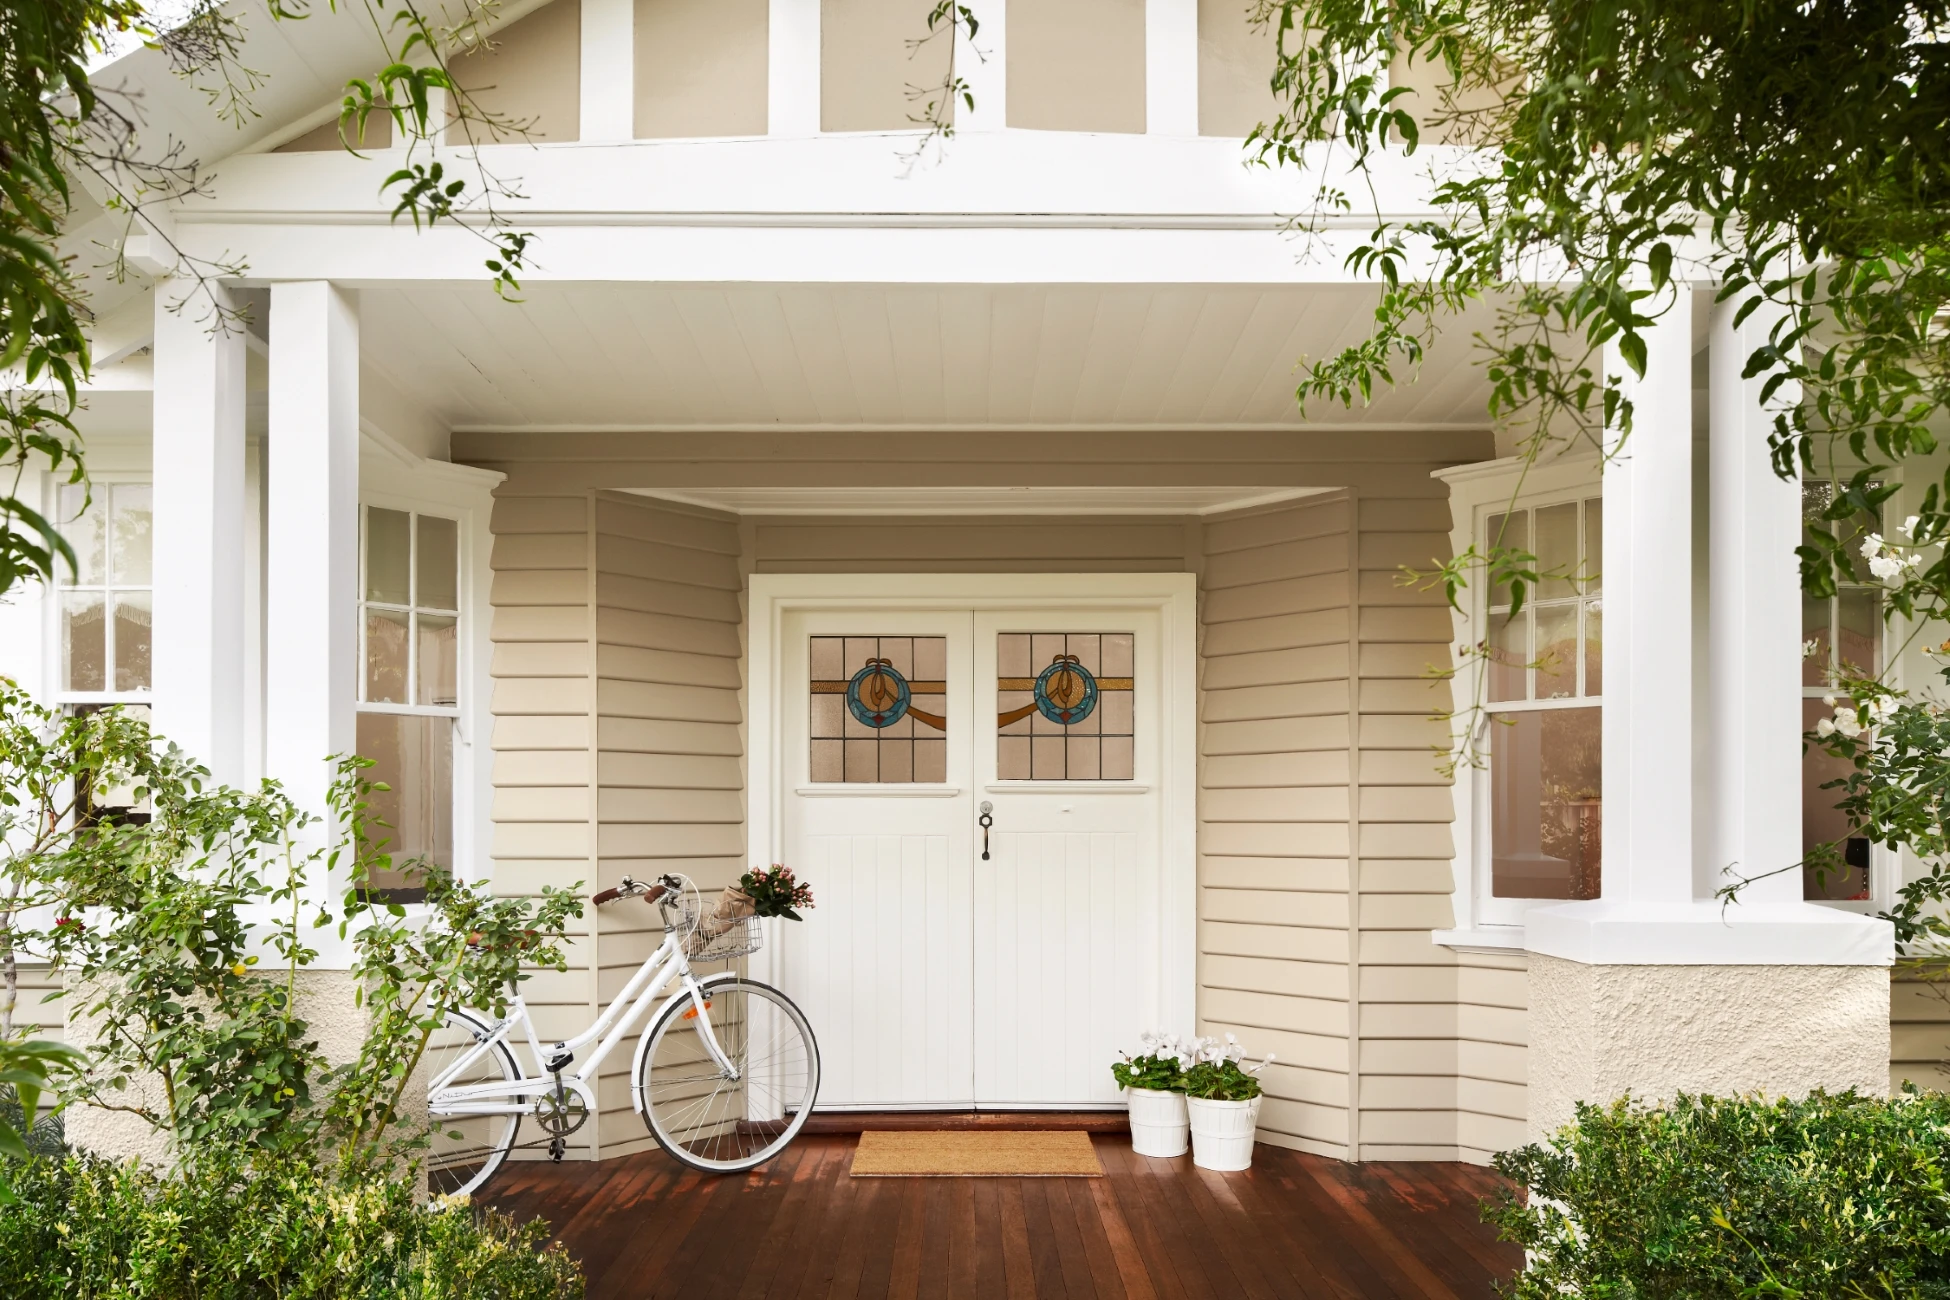 Neutral weatherboard house, white double doors with stained glass inset, white trim.